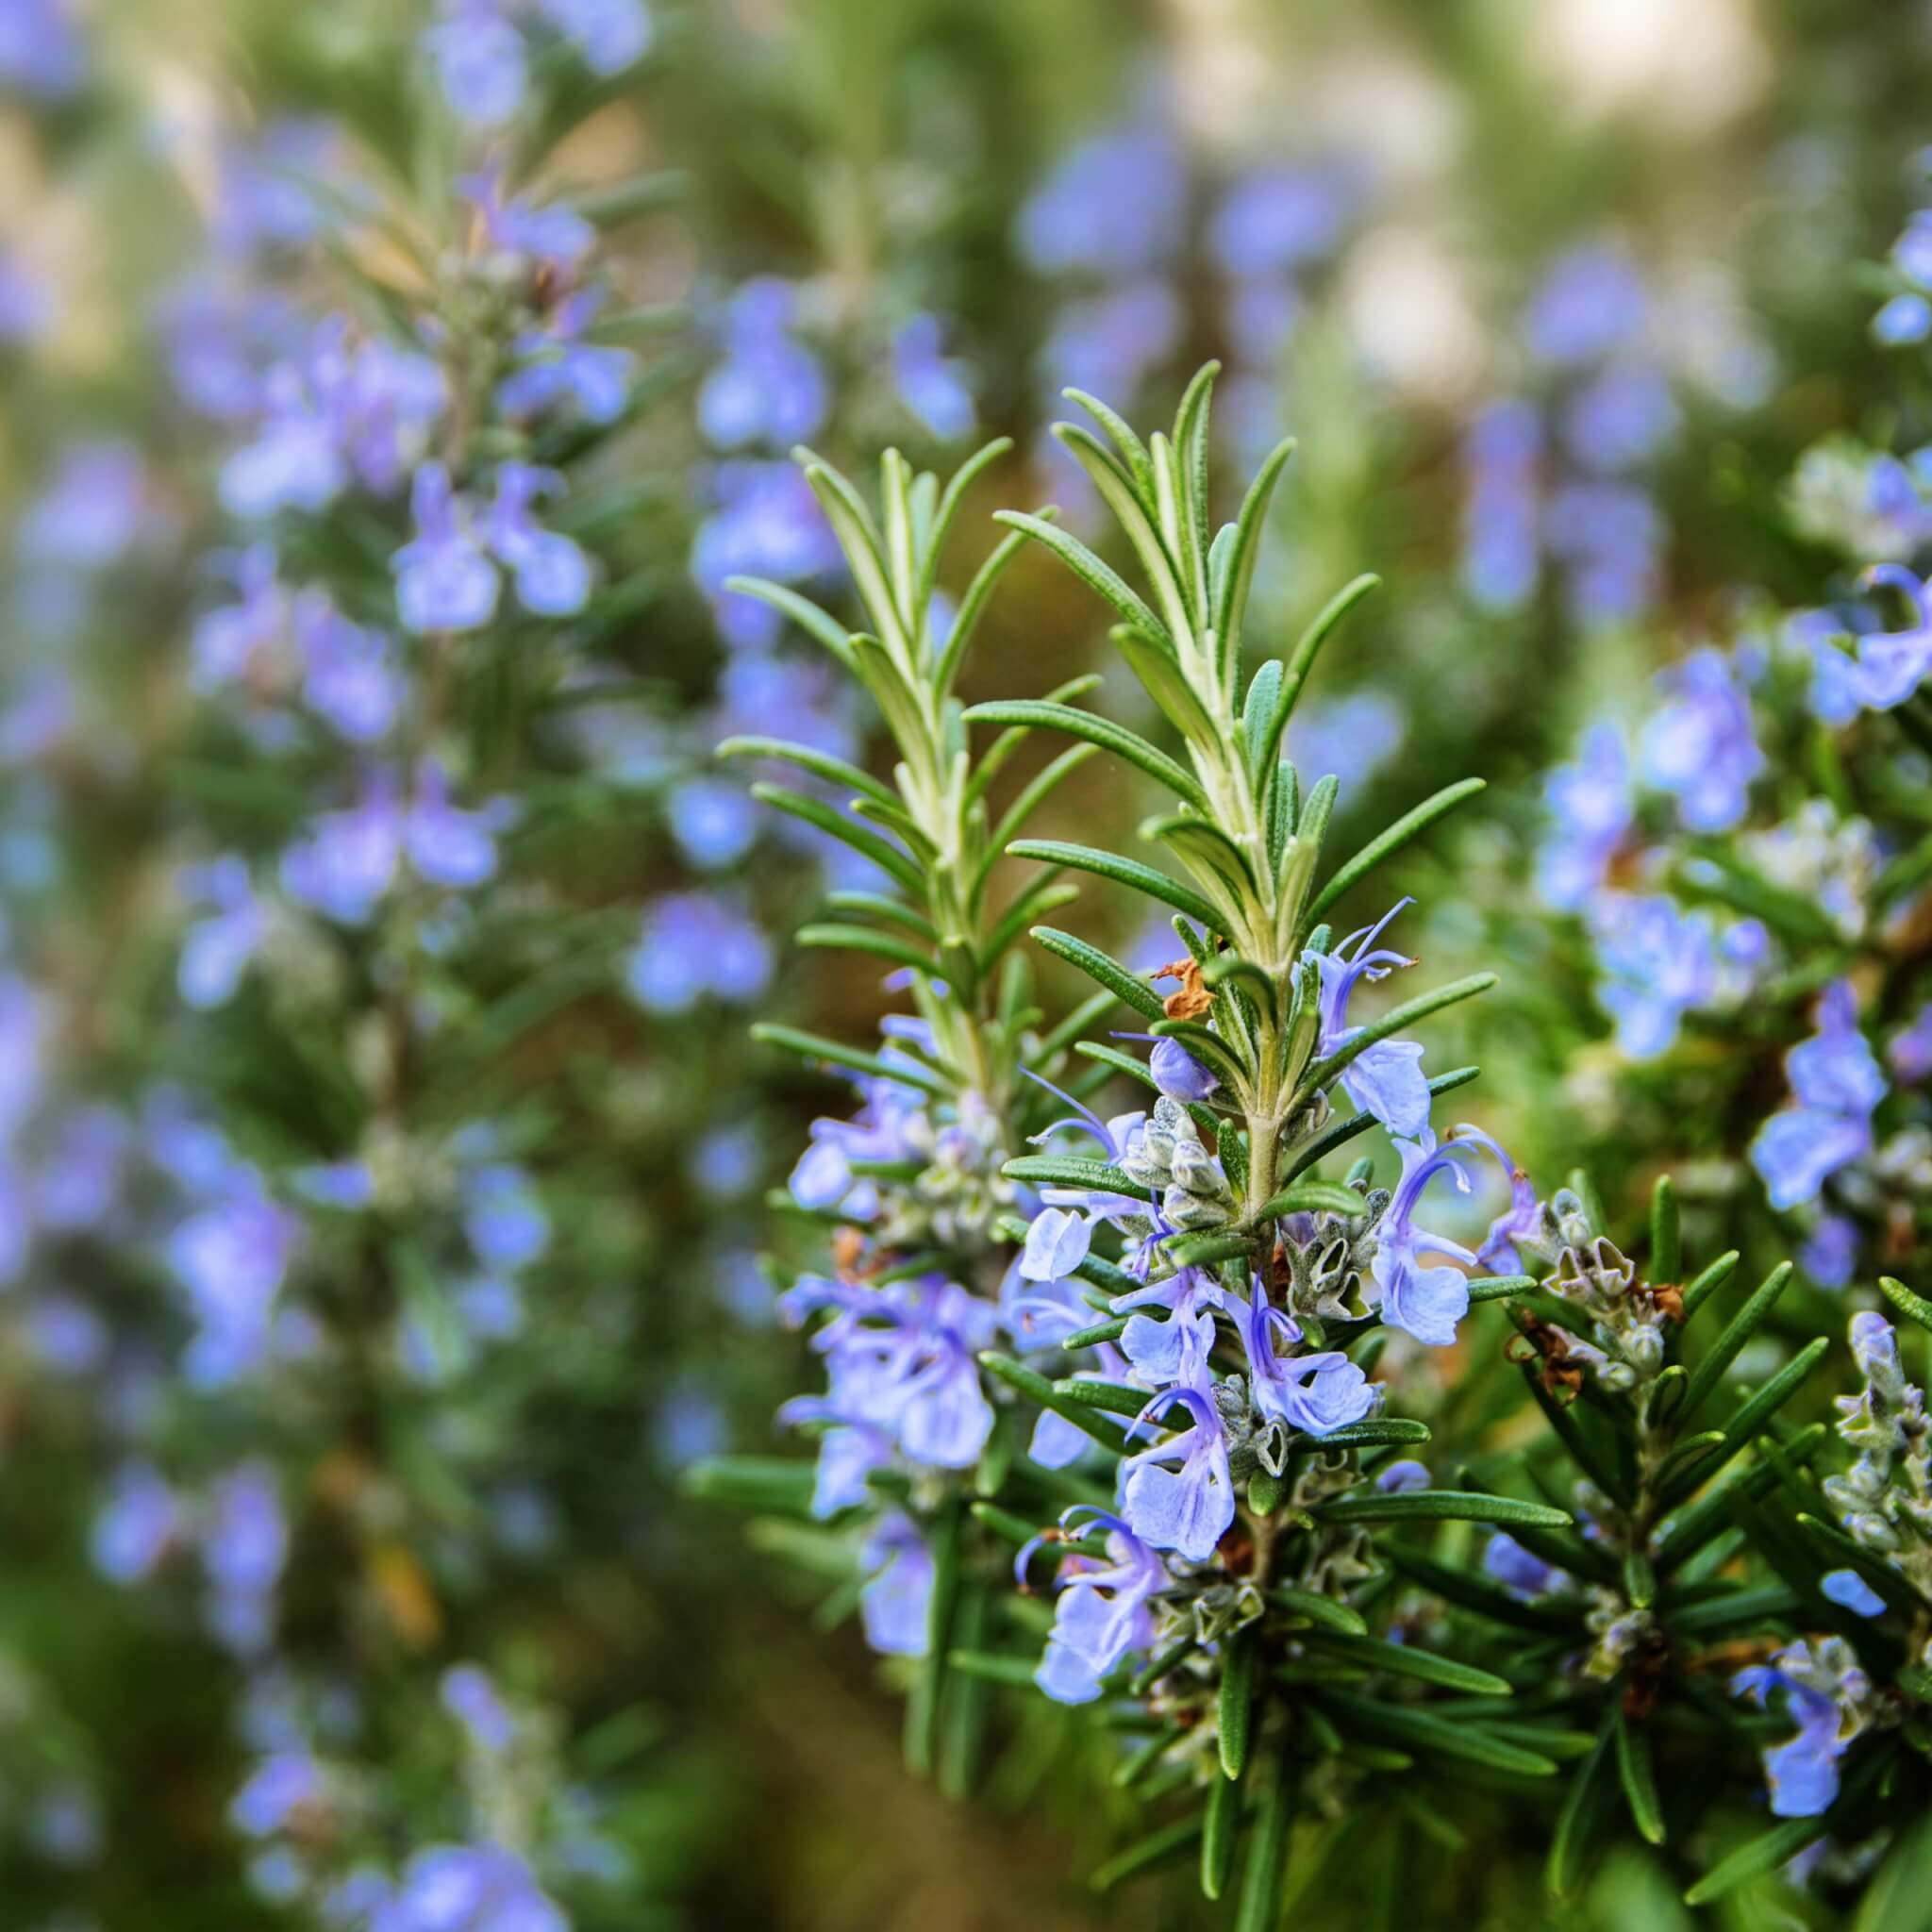 Rosmarinus officinalis Prostrata; Creeping Rosemary blooming with purple flowers